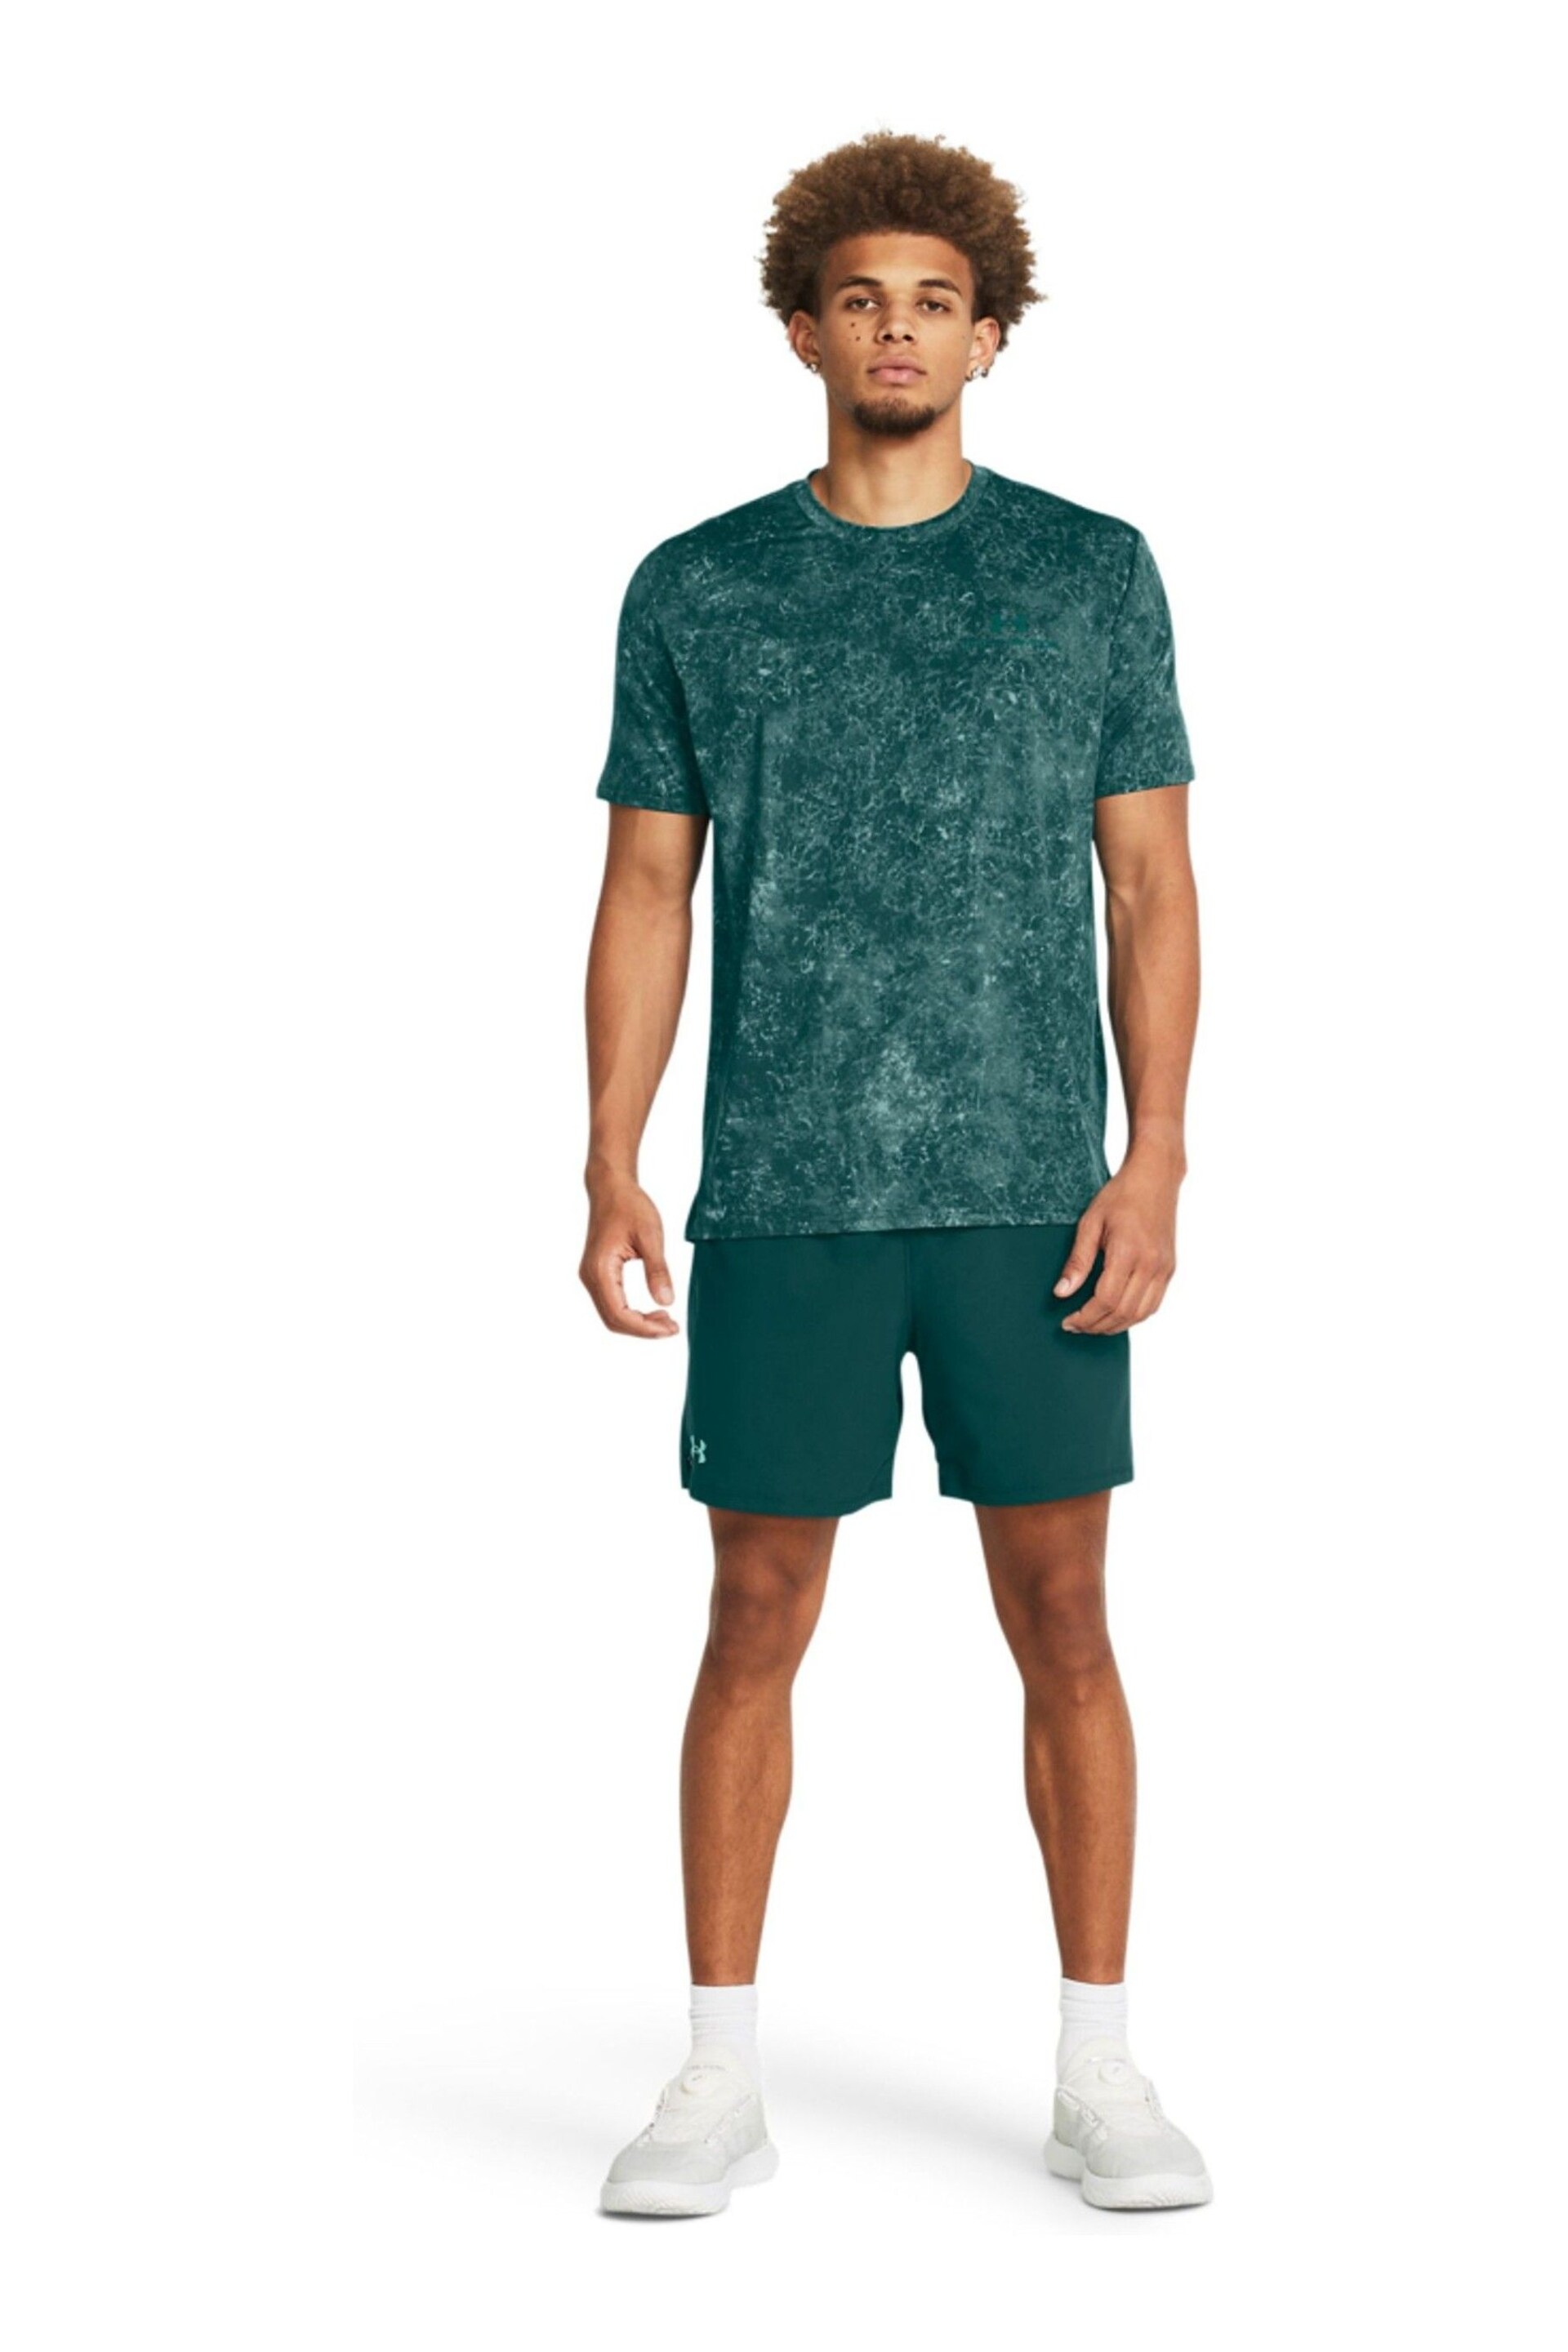 Under Armour Teal Blue Vanish Shorts - Image 3 of 6